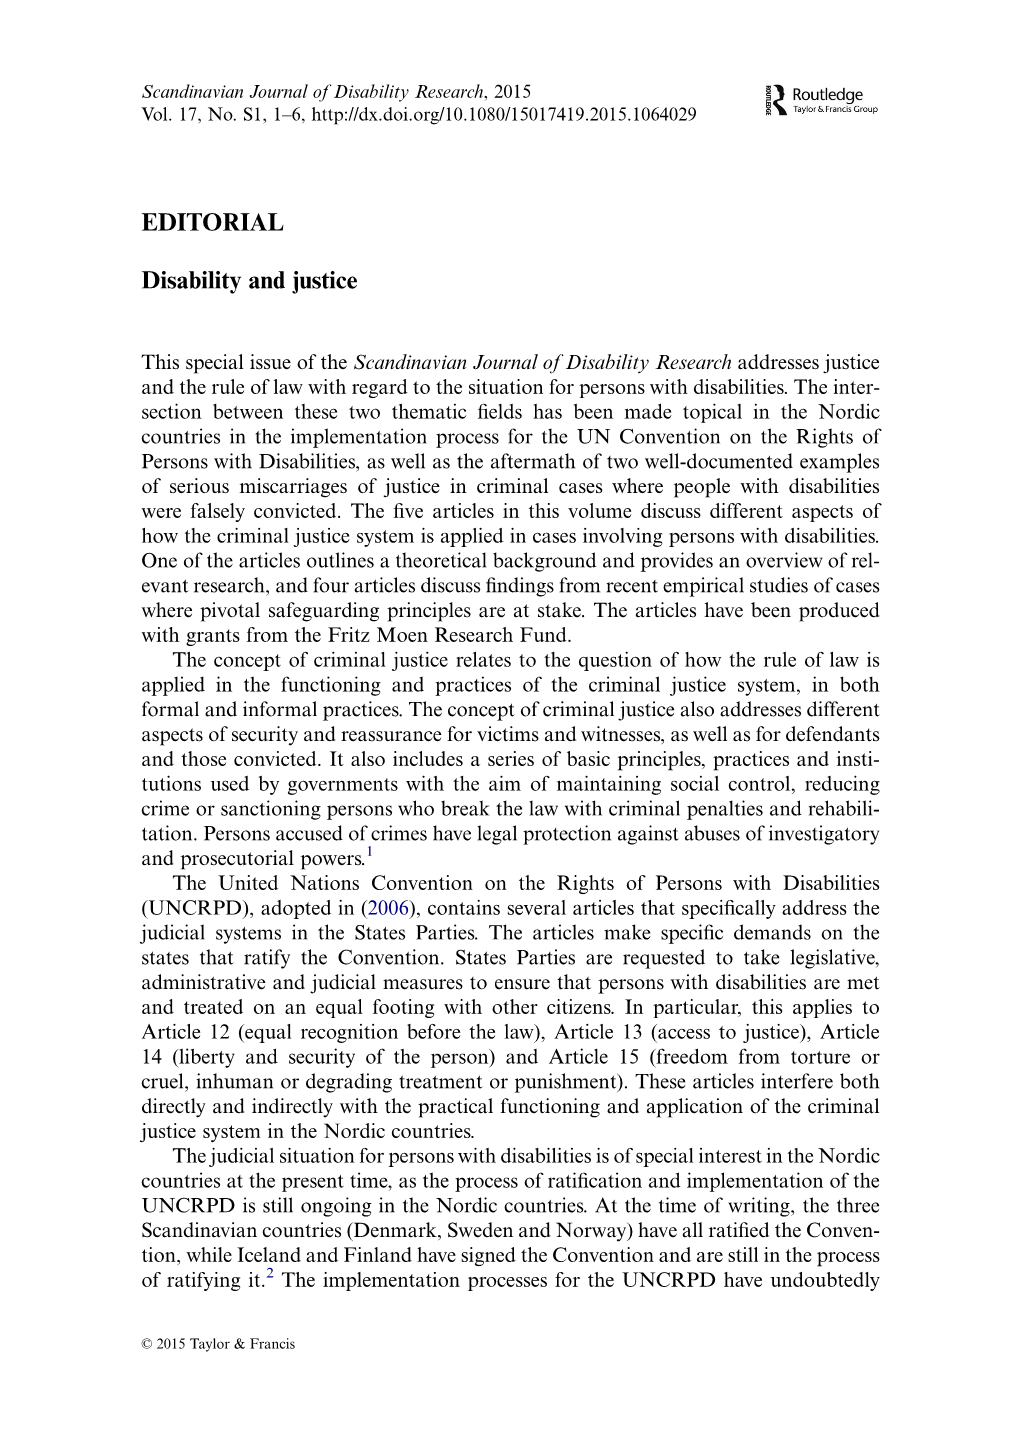 EDITORIAL Disability and Justice